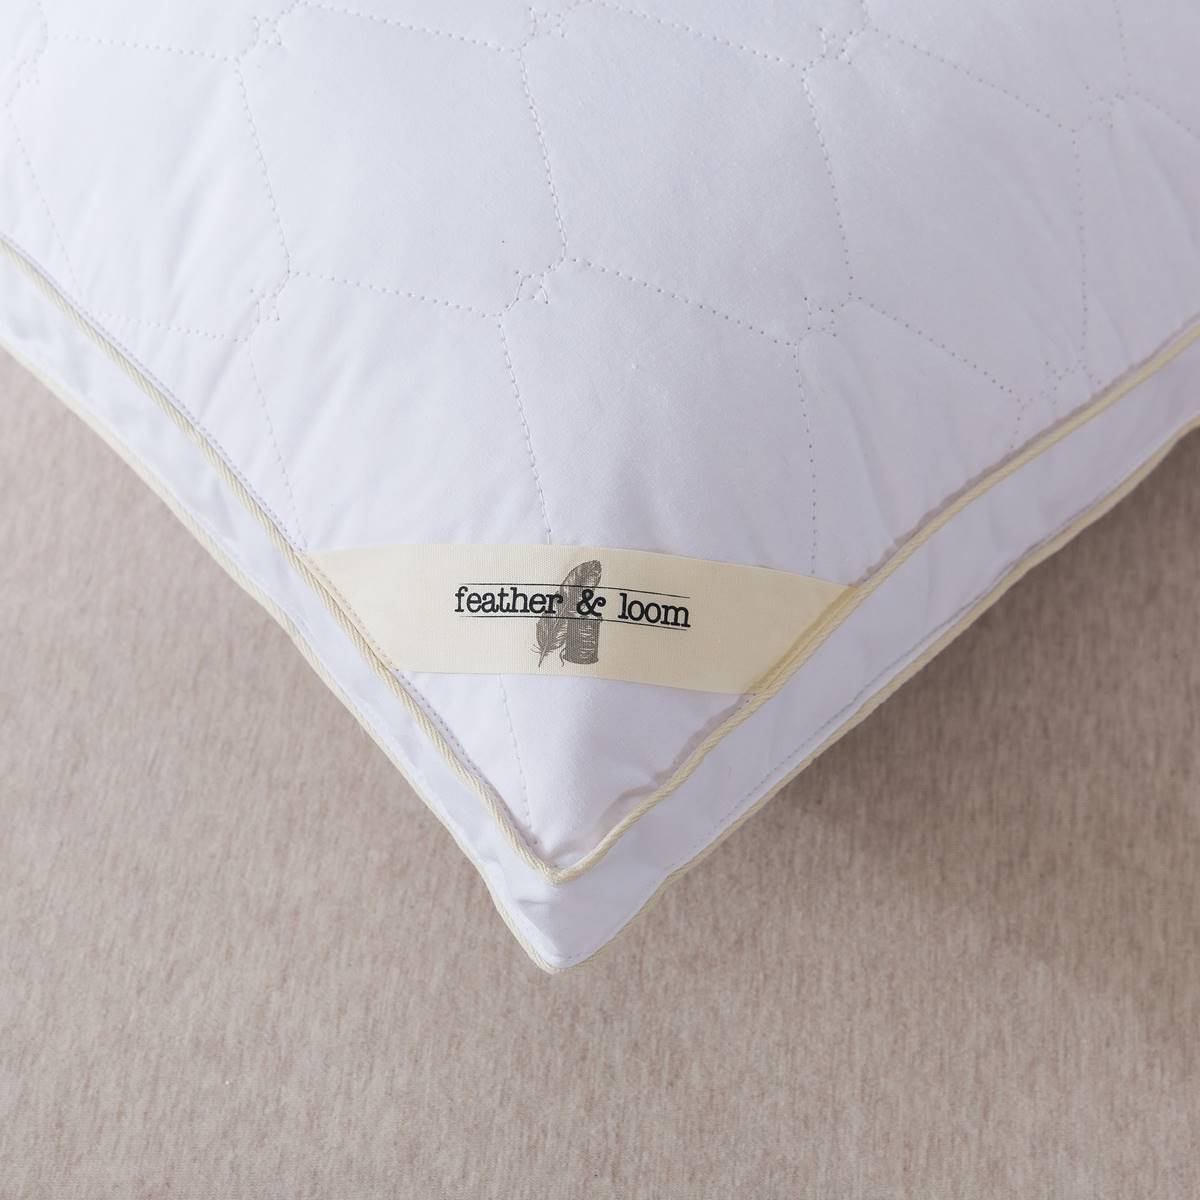 St. James Home Feather & Loom Cotton Quilted Nano Feather Pillow